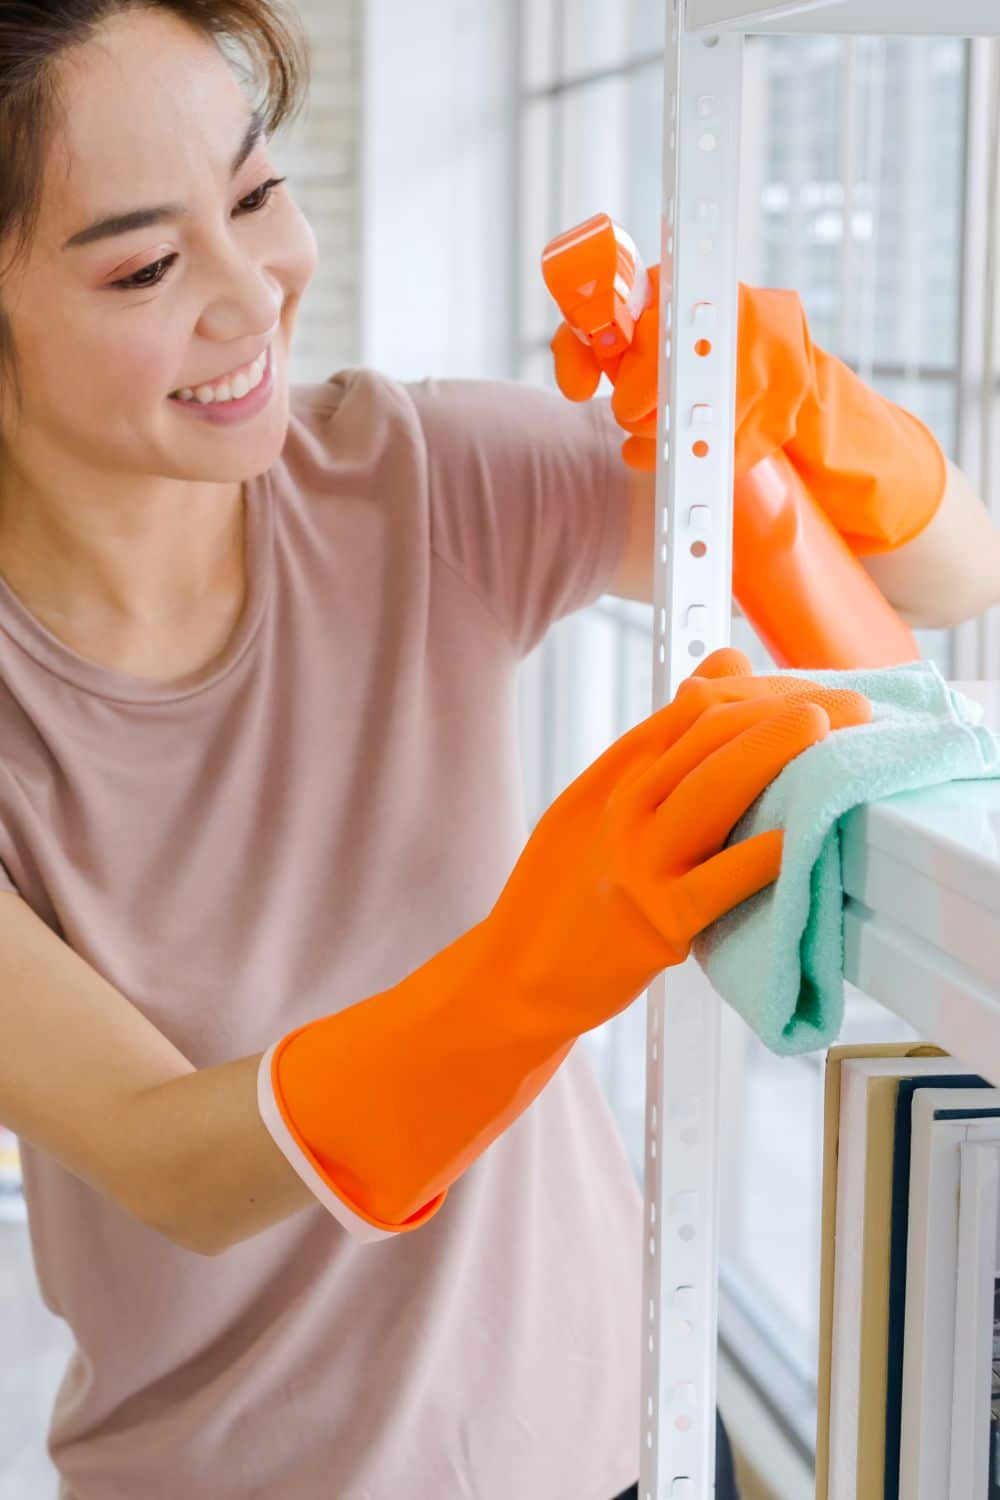 4 Effective Strategies for Keeping Your Home Sparkling Clean